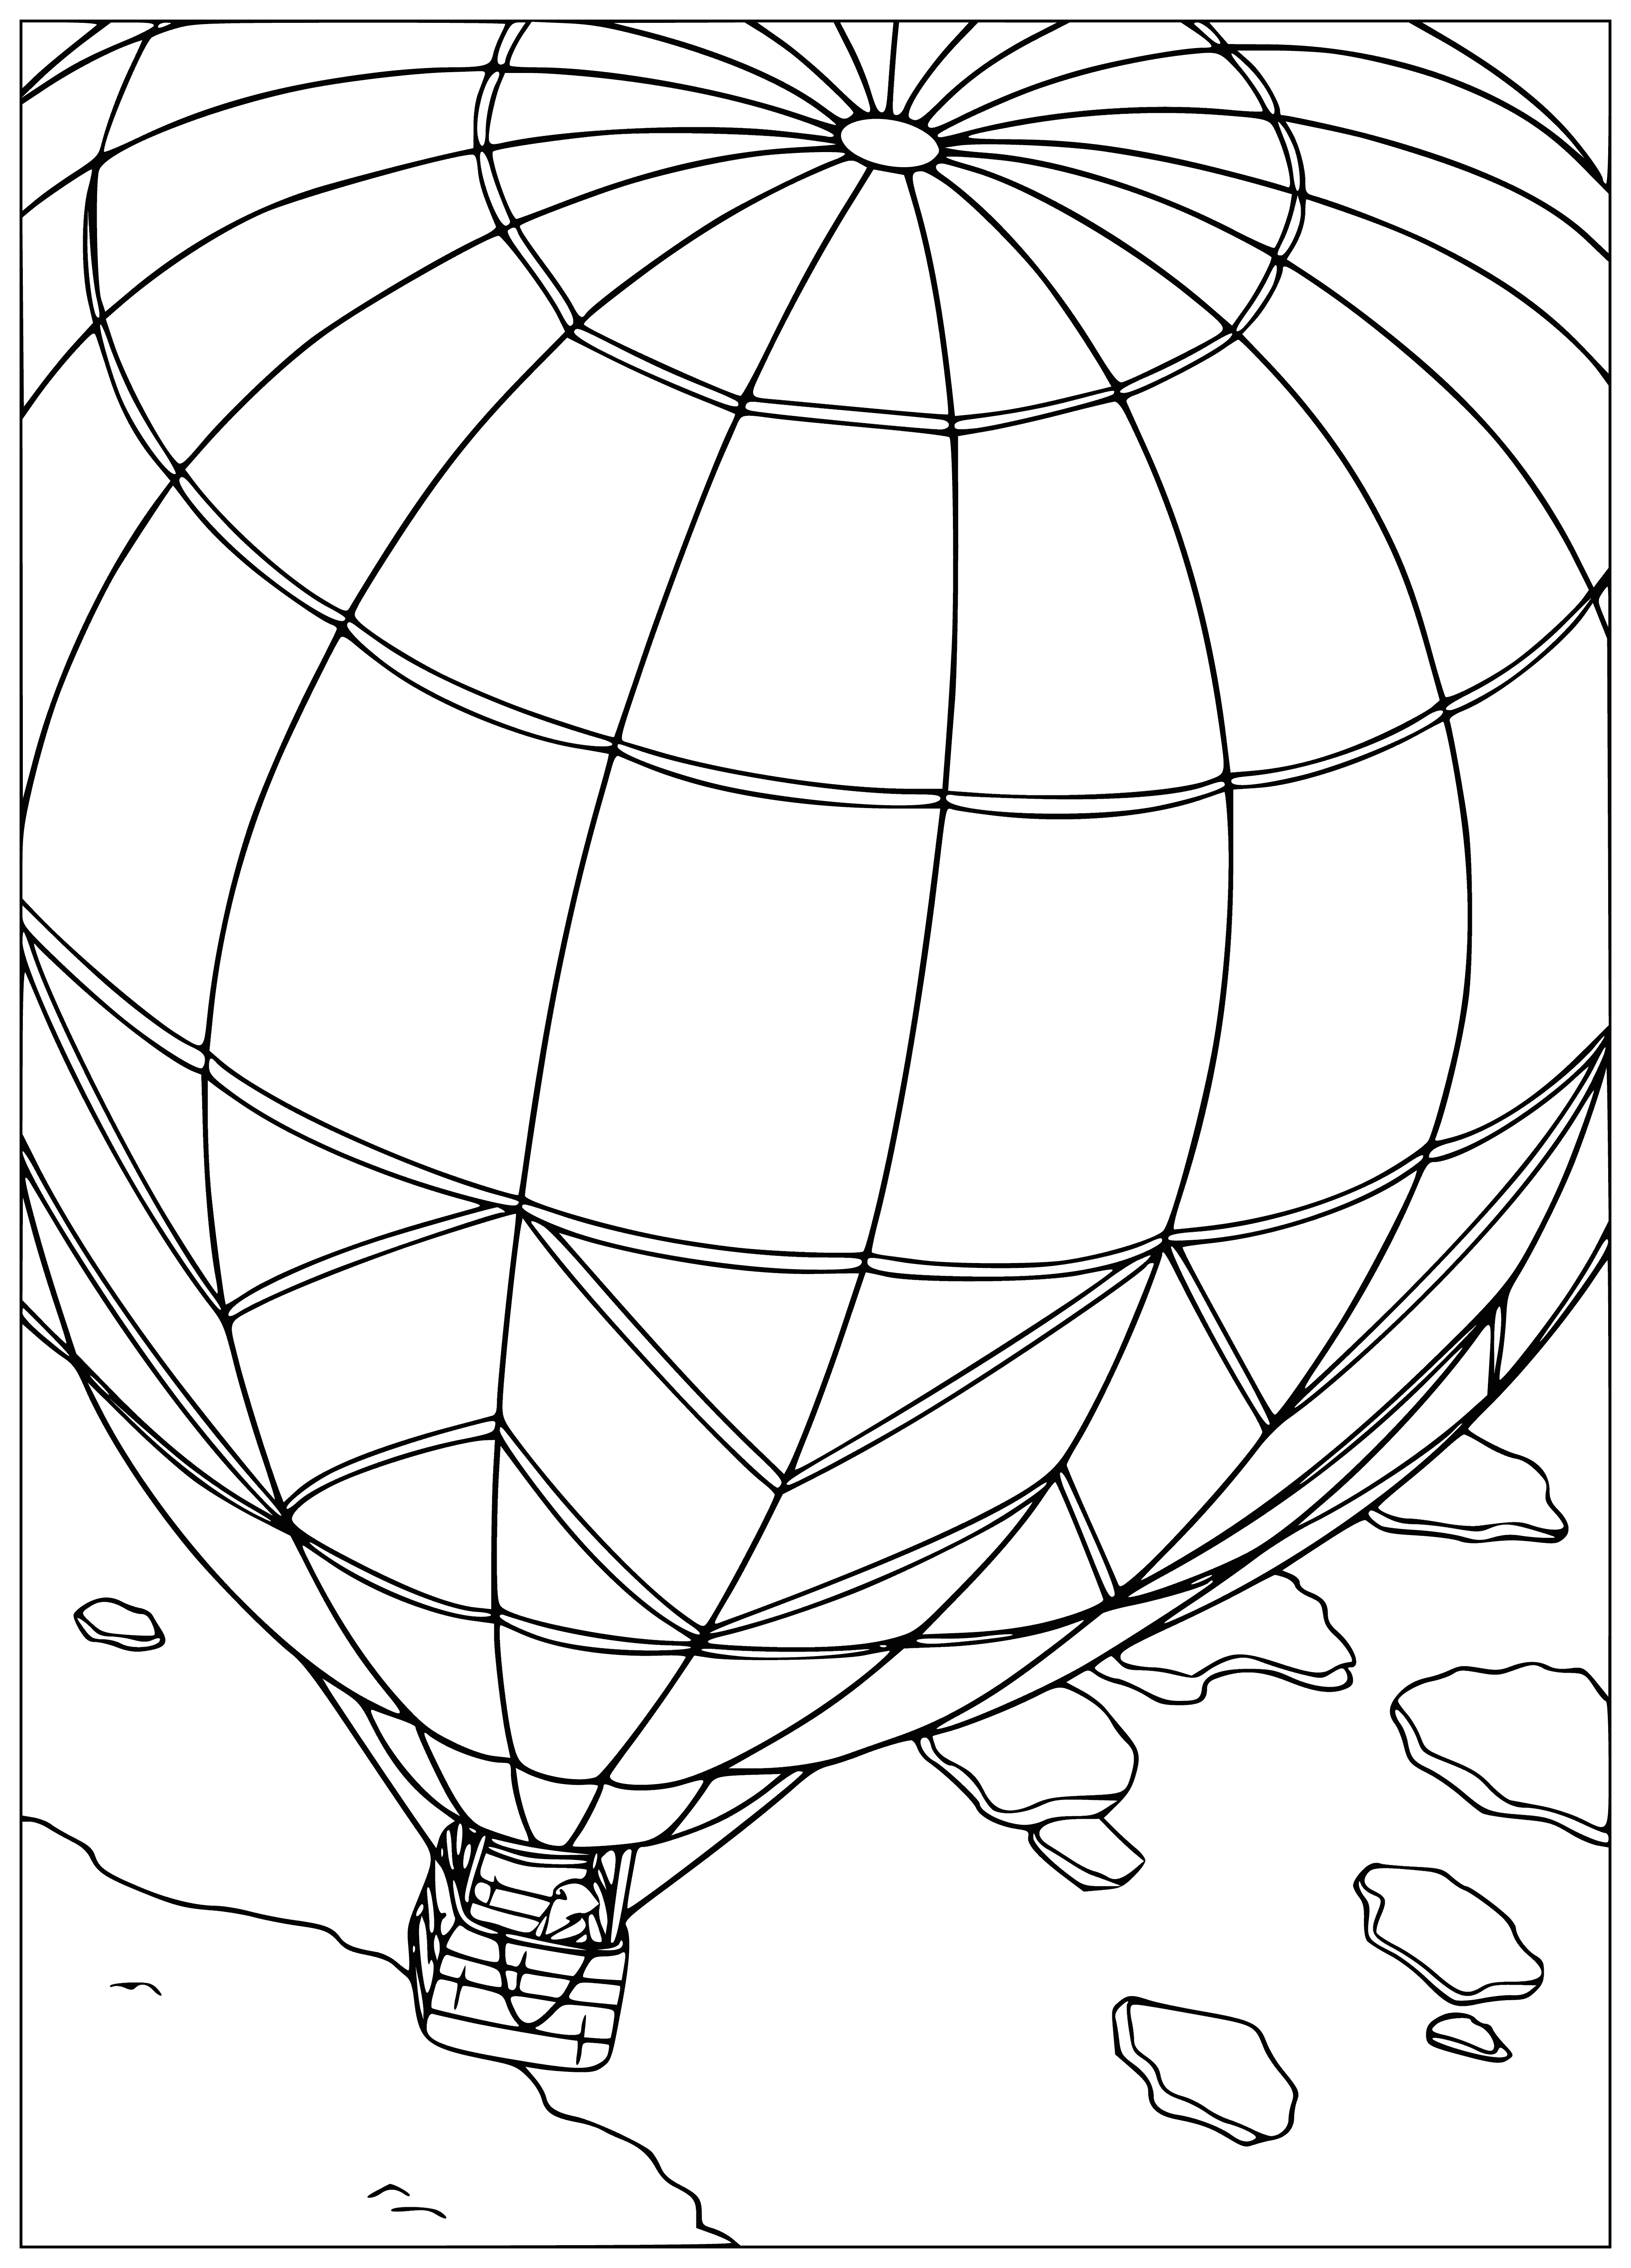 On the ball coloring page